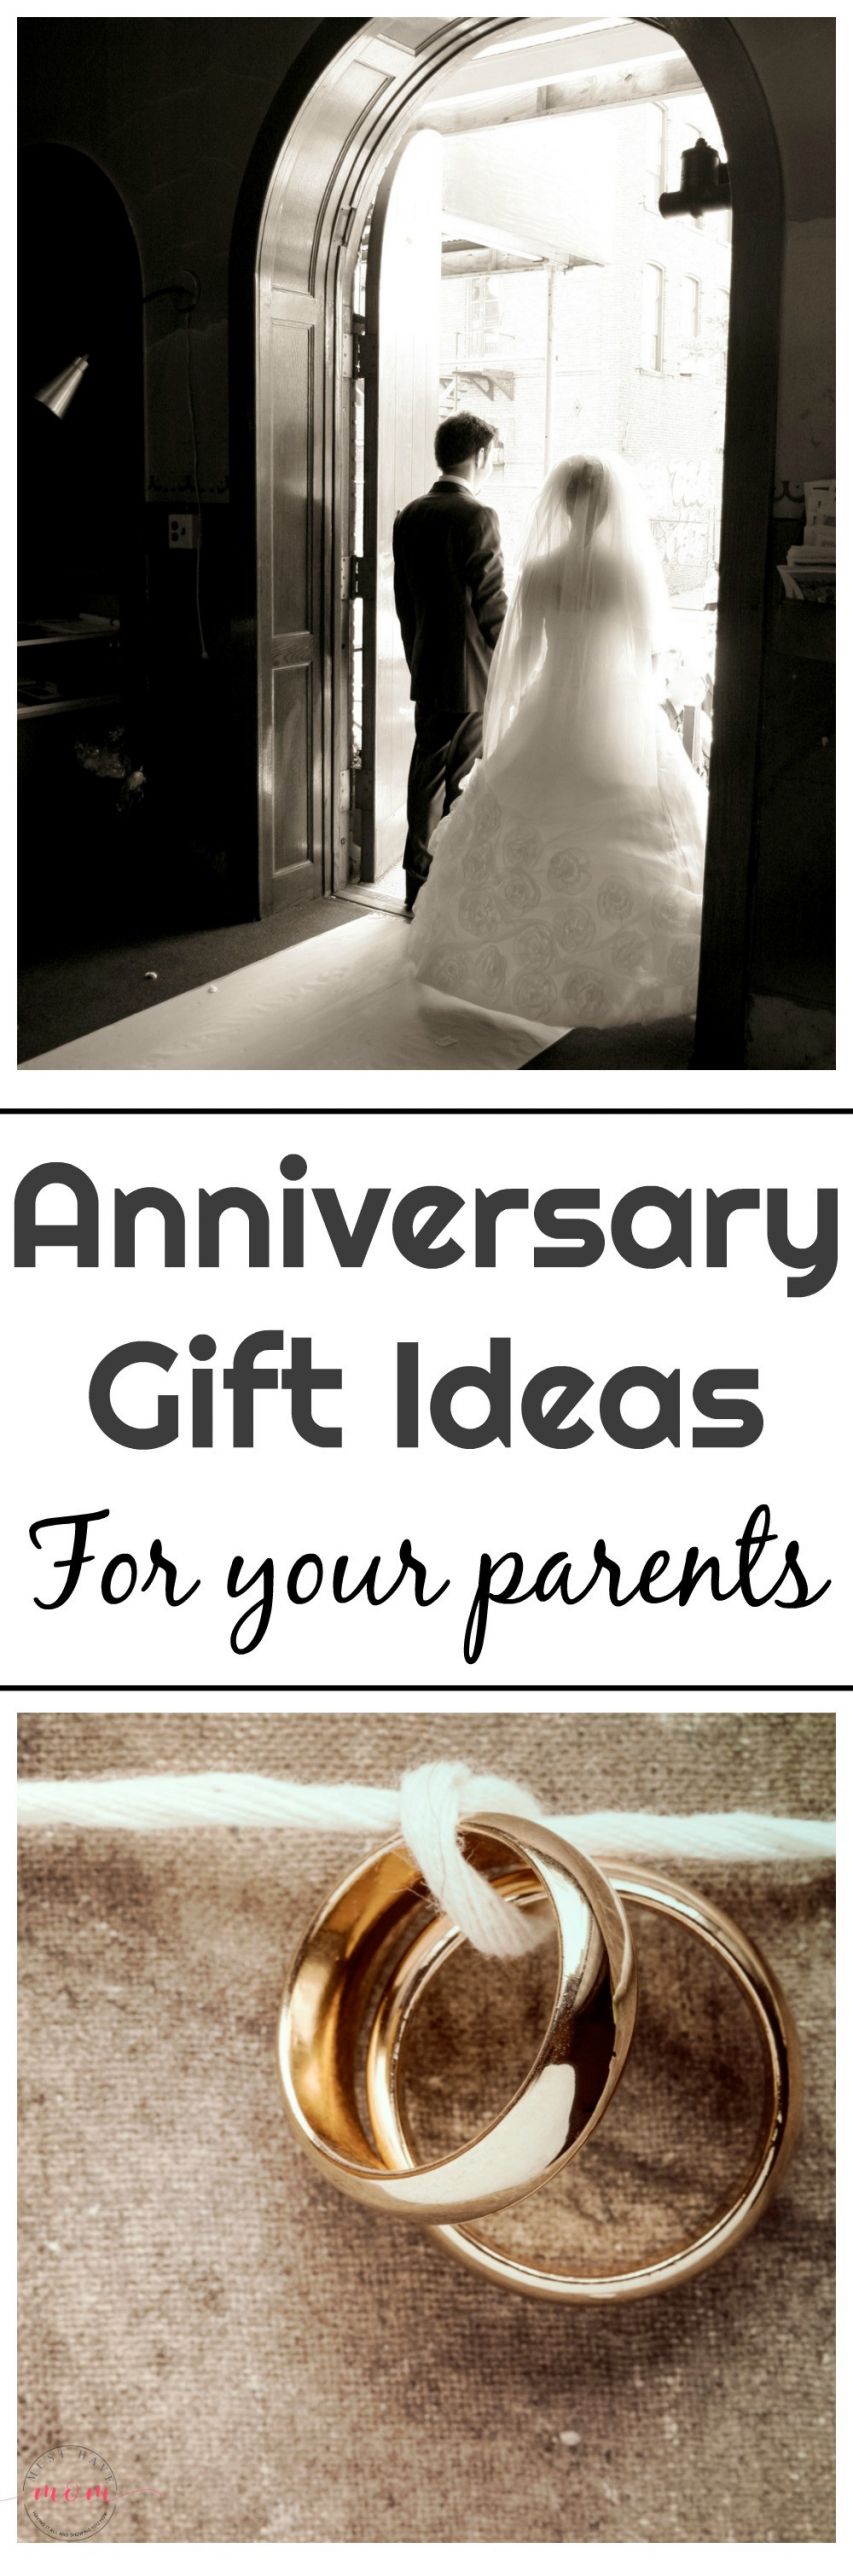 Parent Anniversary Gift Ideas
 Your Parents’ Anniversary Is ing Up 7 Gifts That Show